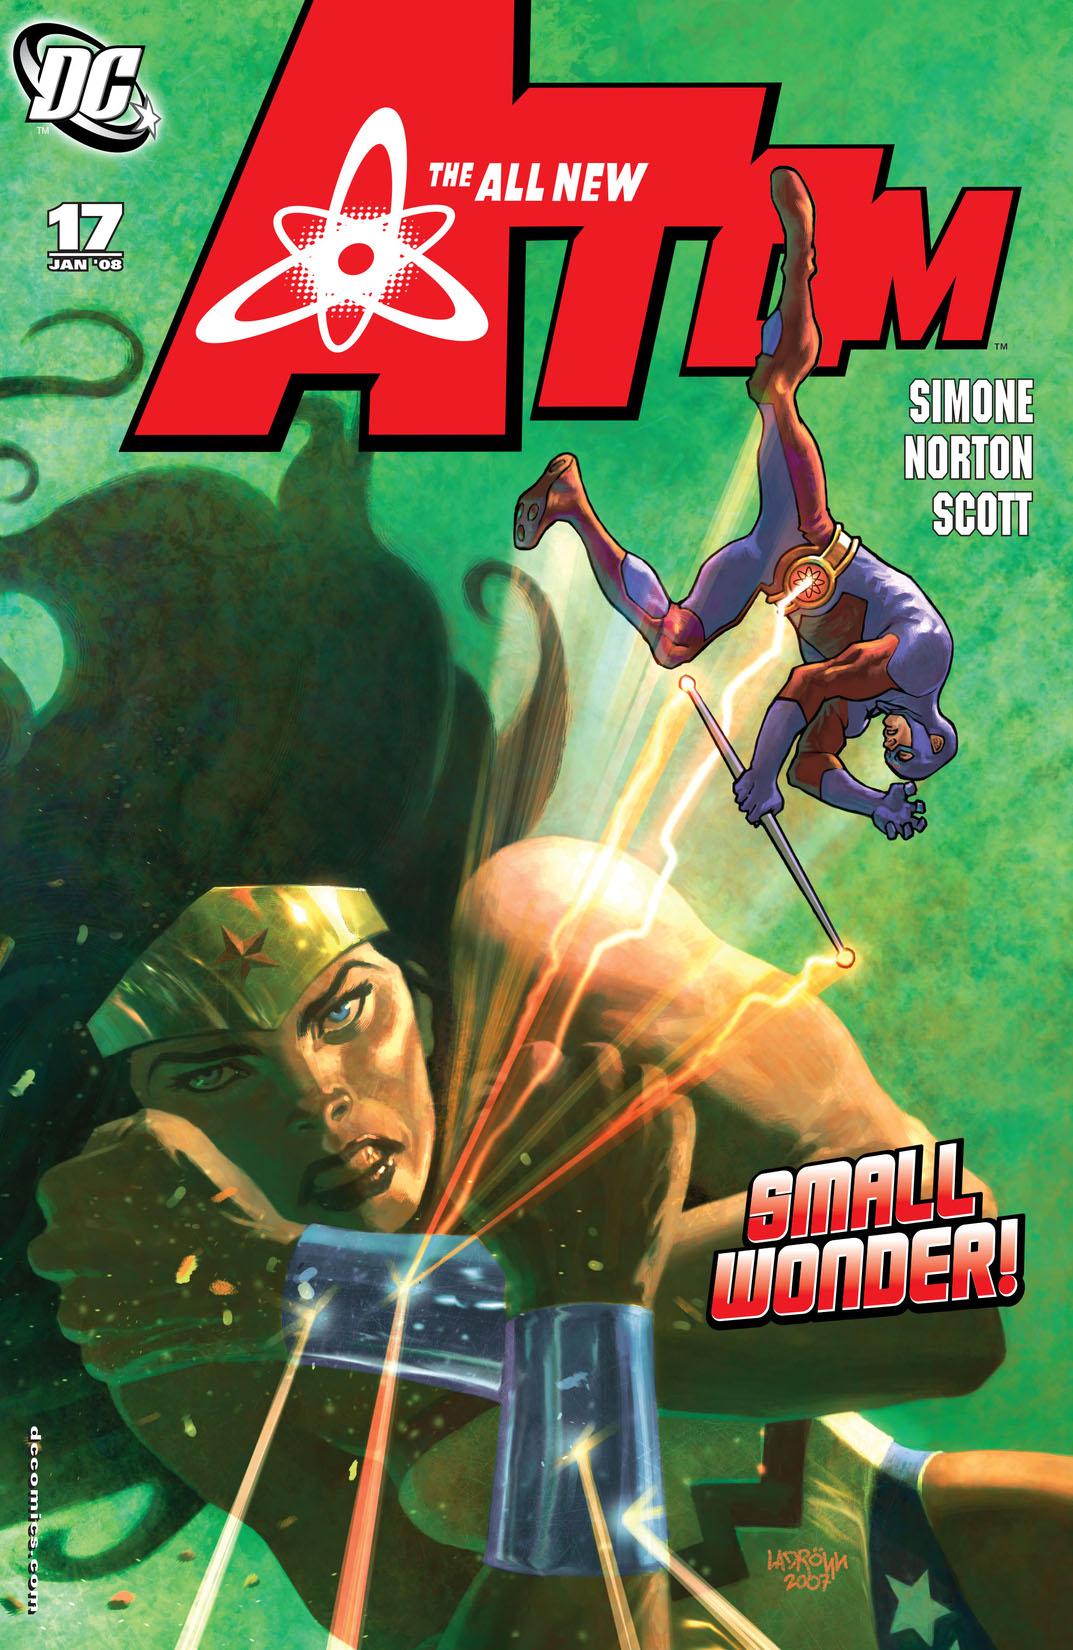 The All New Atom #17 preview images